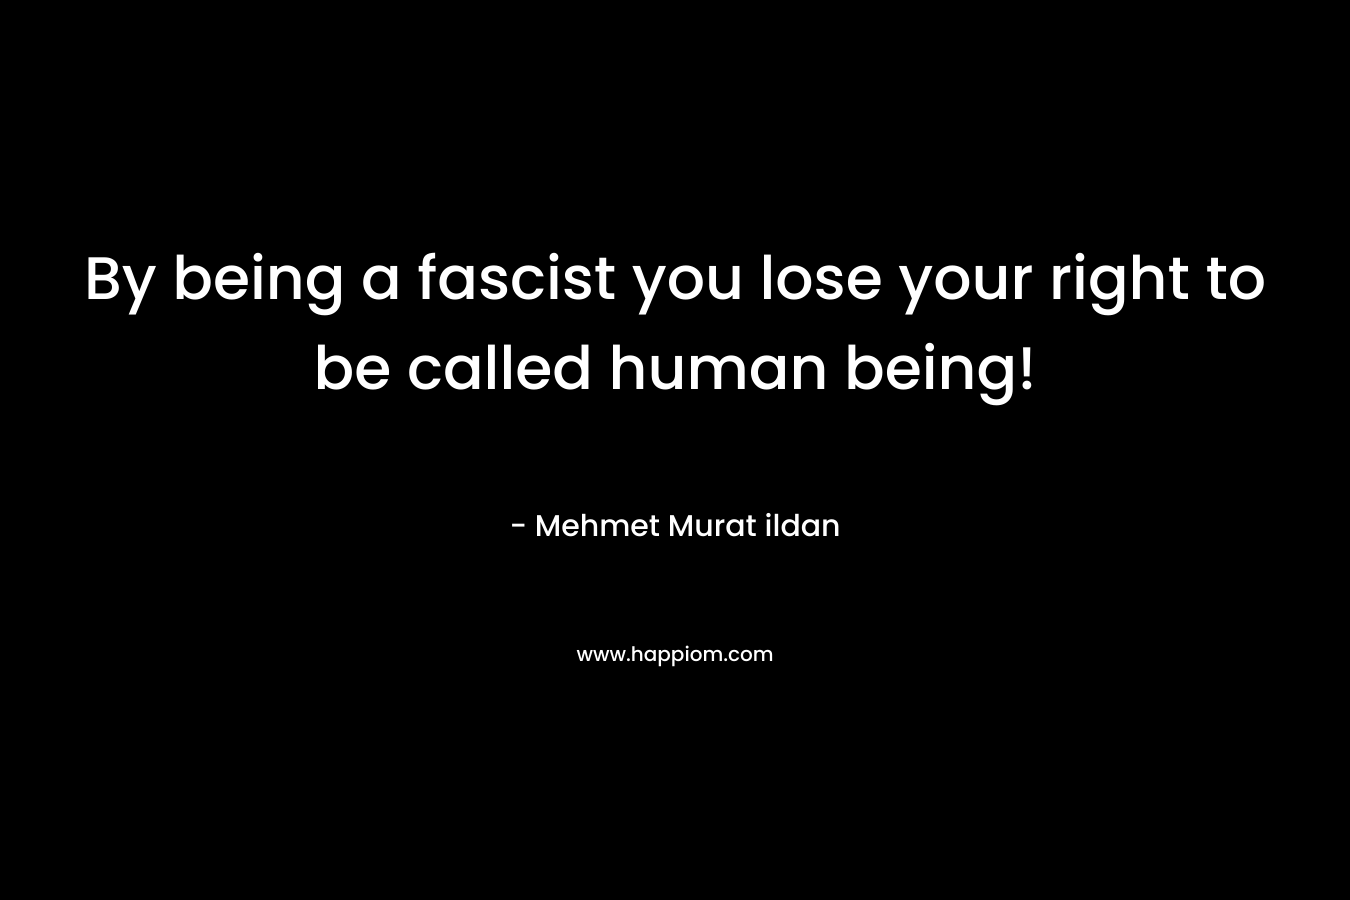 By being a fascist you lose your right to be called human being! – Mehmet Murat ildan